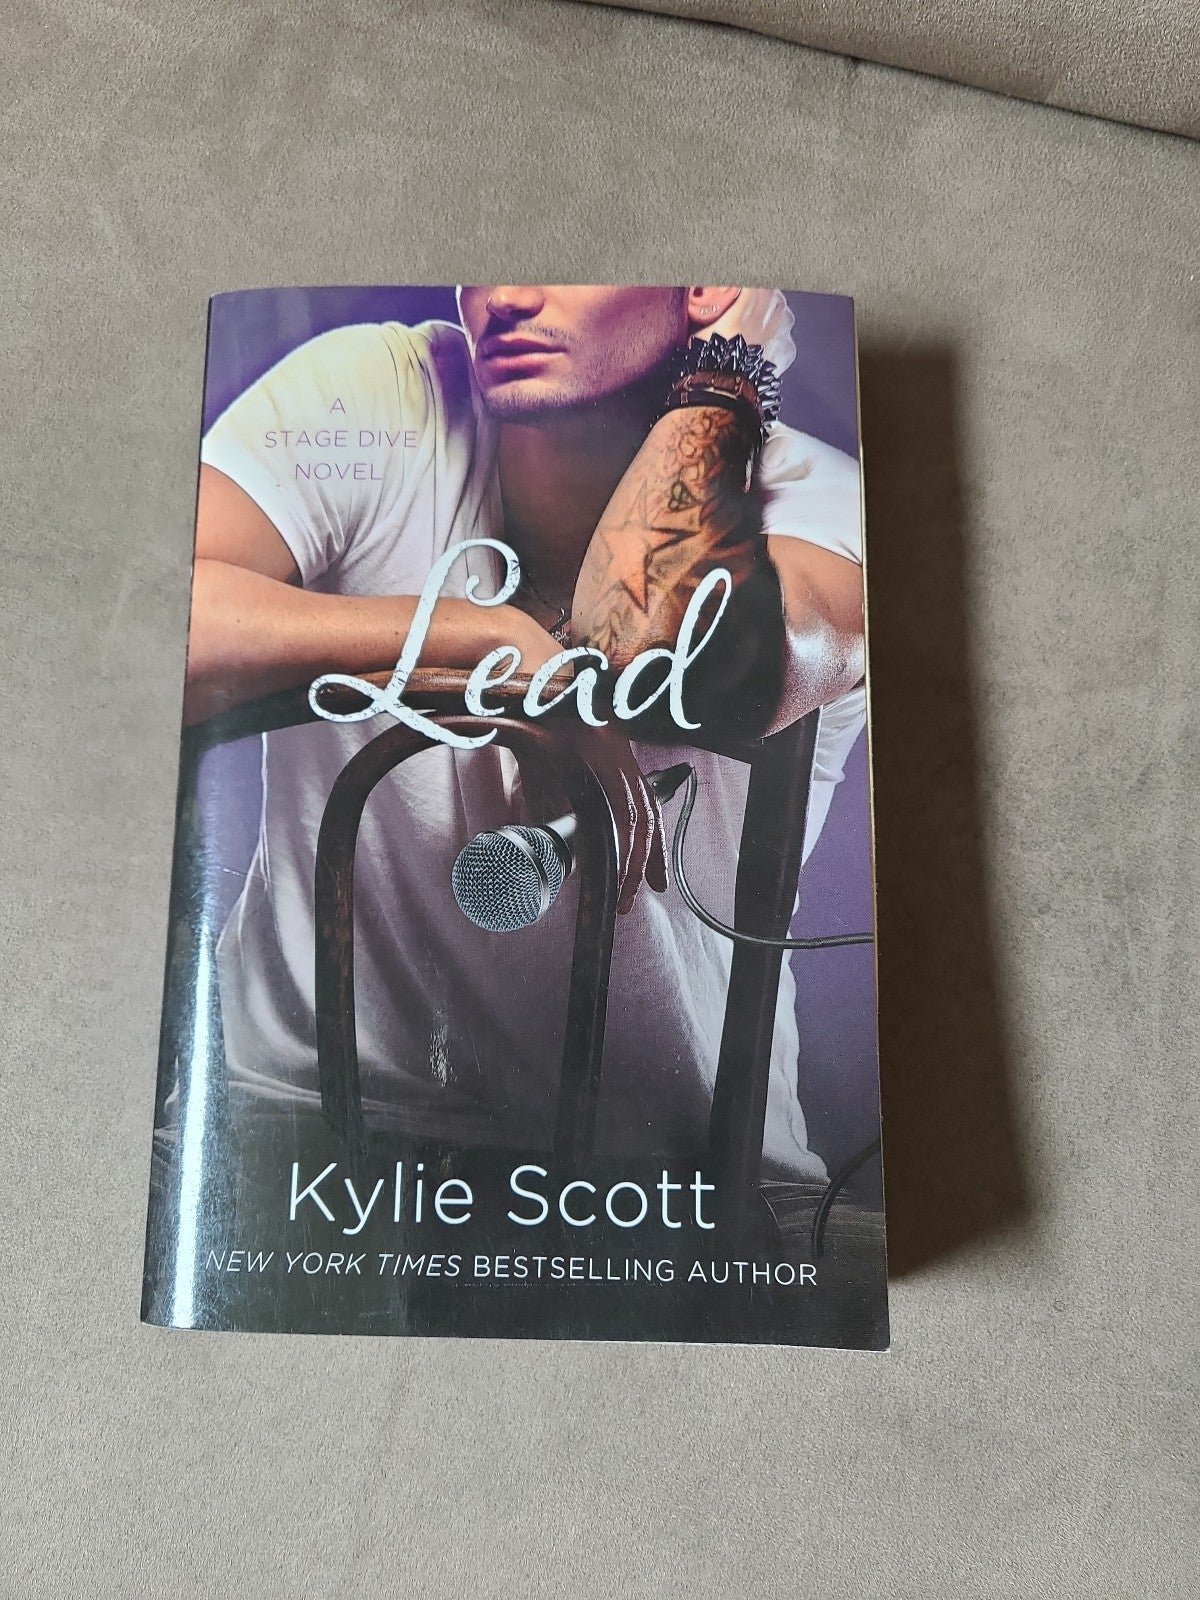 Lick Play and Lead books by Kylie Scott from Stage Dive novels IPq3PsxbM